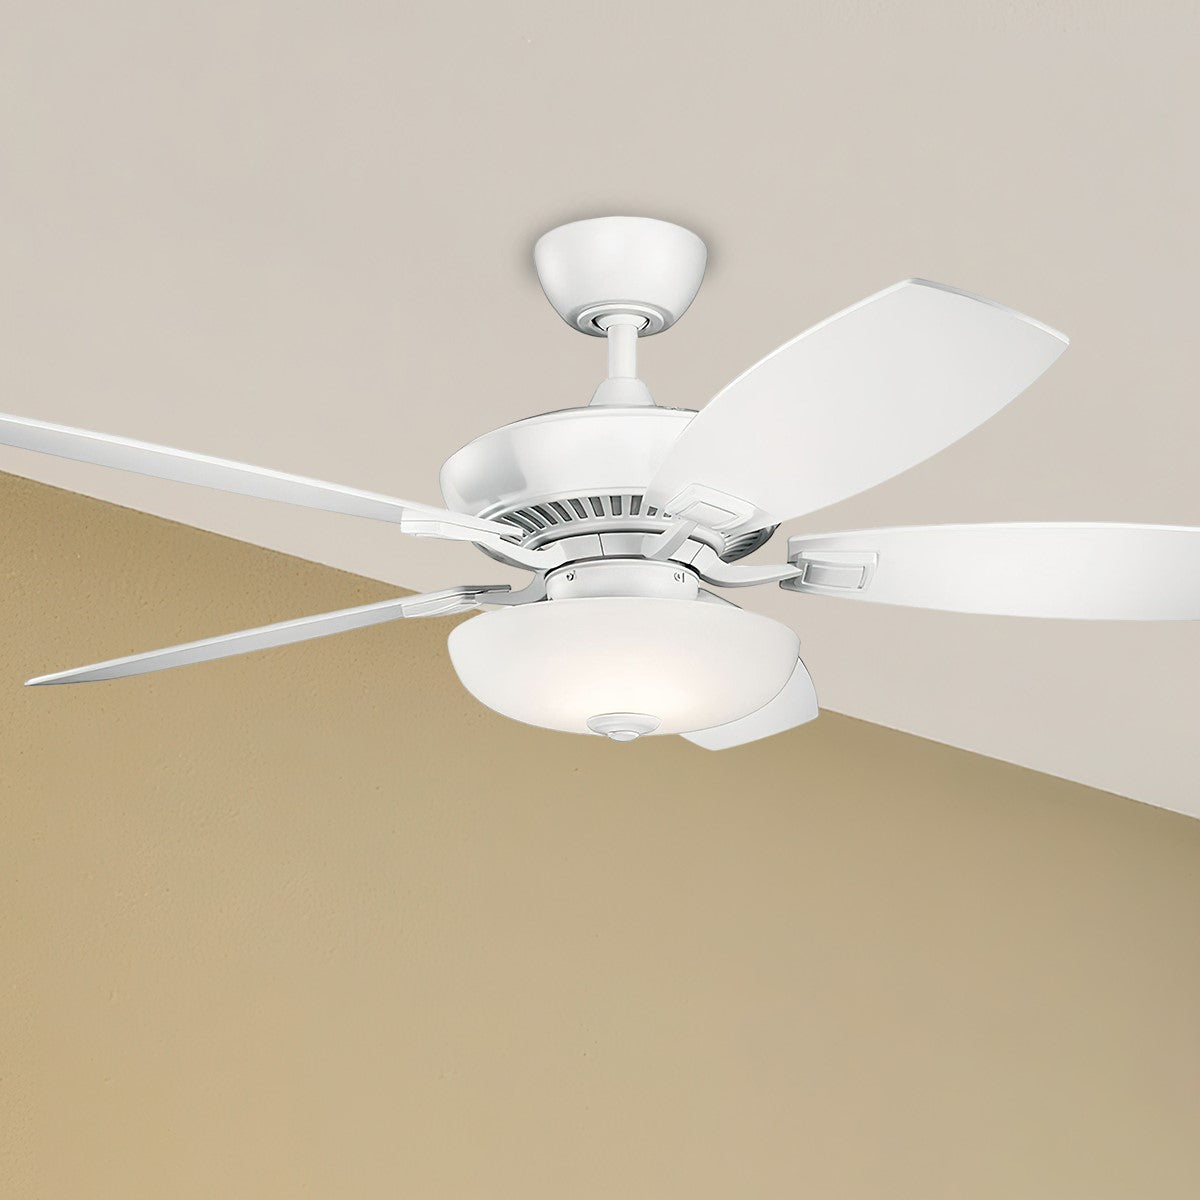 Canfield 52 Inch Ceiling Fan With Light, Wall Control Included